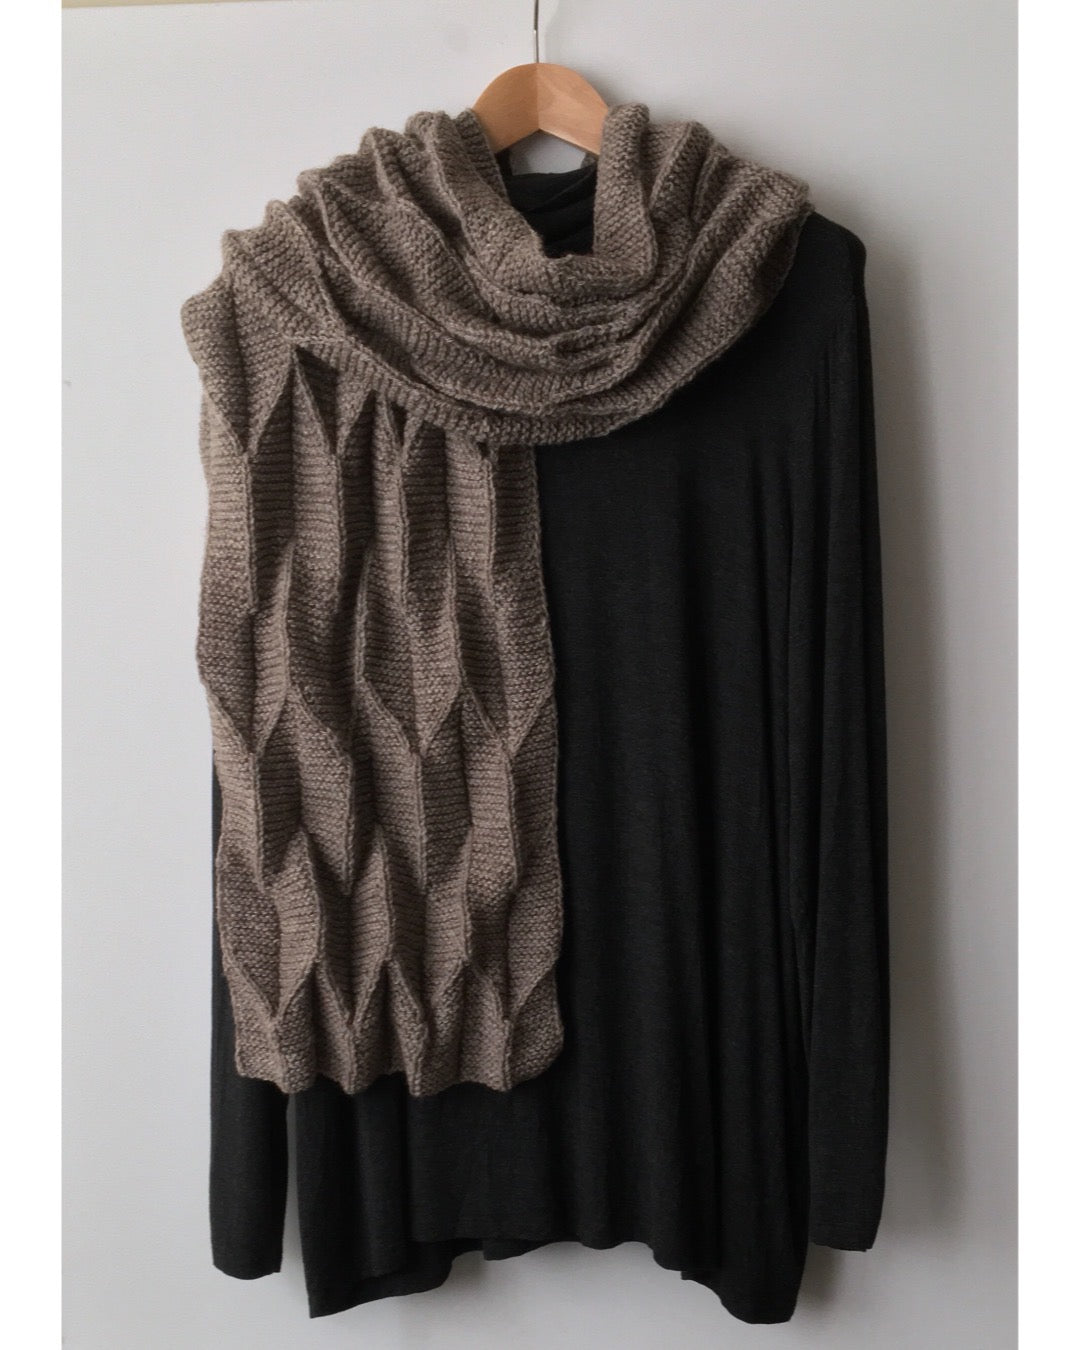 A textured scarf knit in Copaca DK draped over a black top